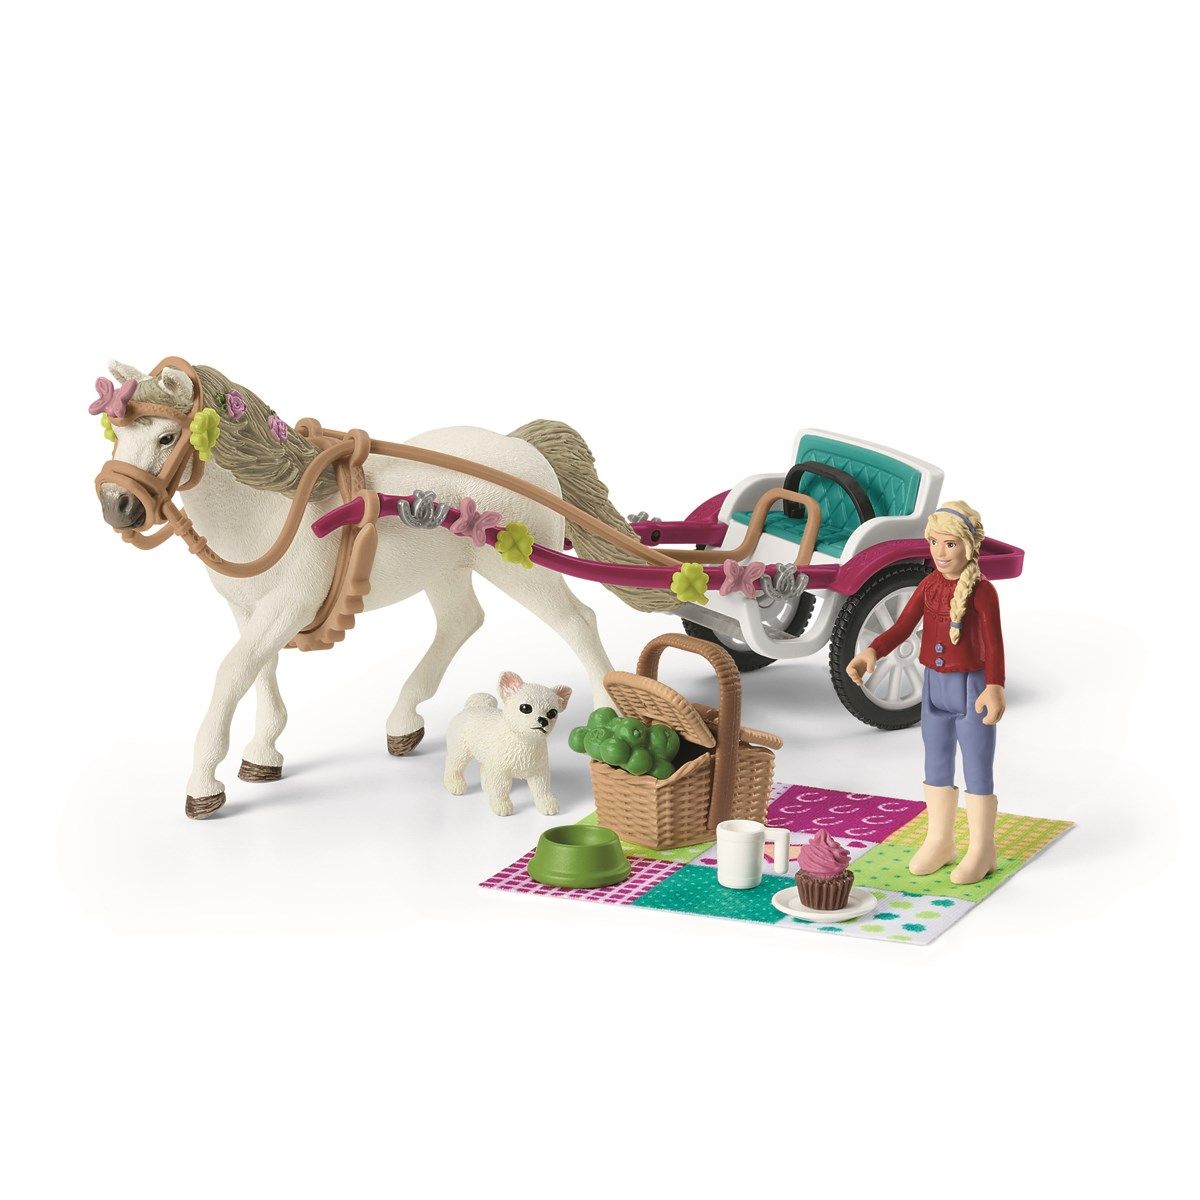 Schleich - Small carriage for the big horse show​ (42467)​